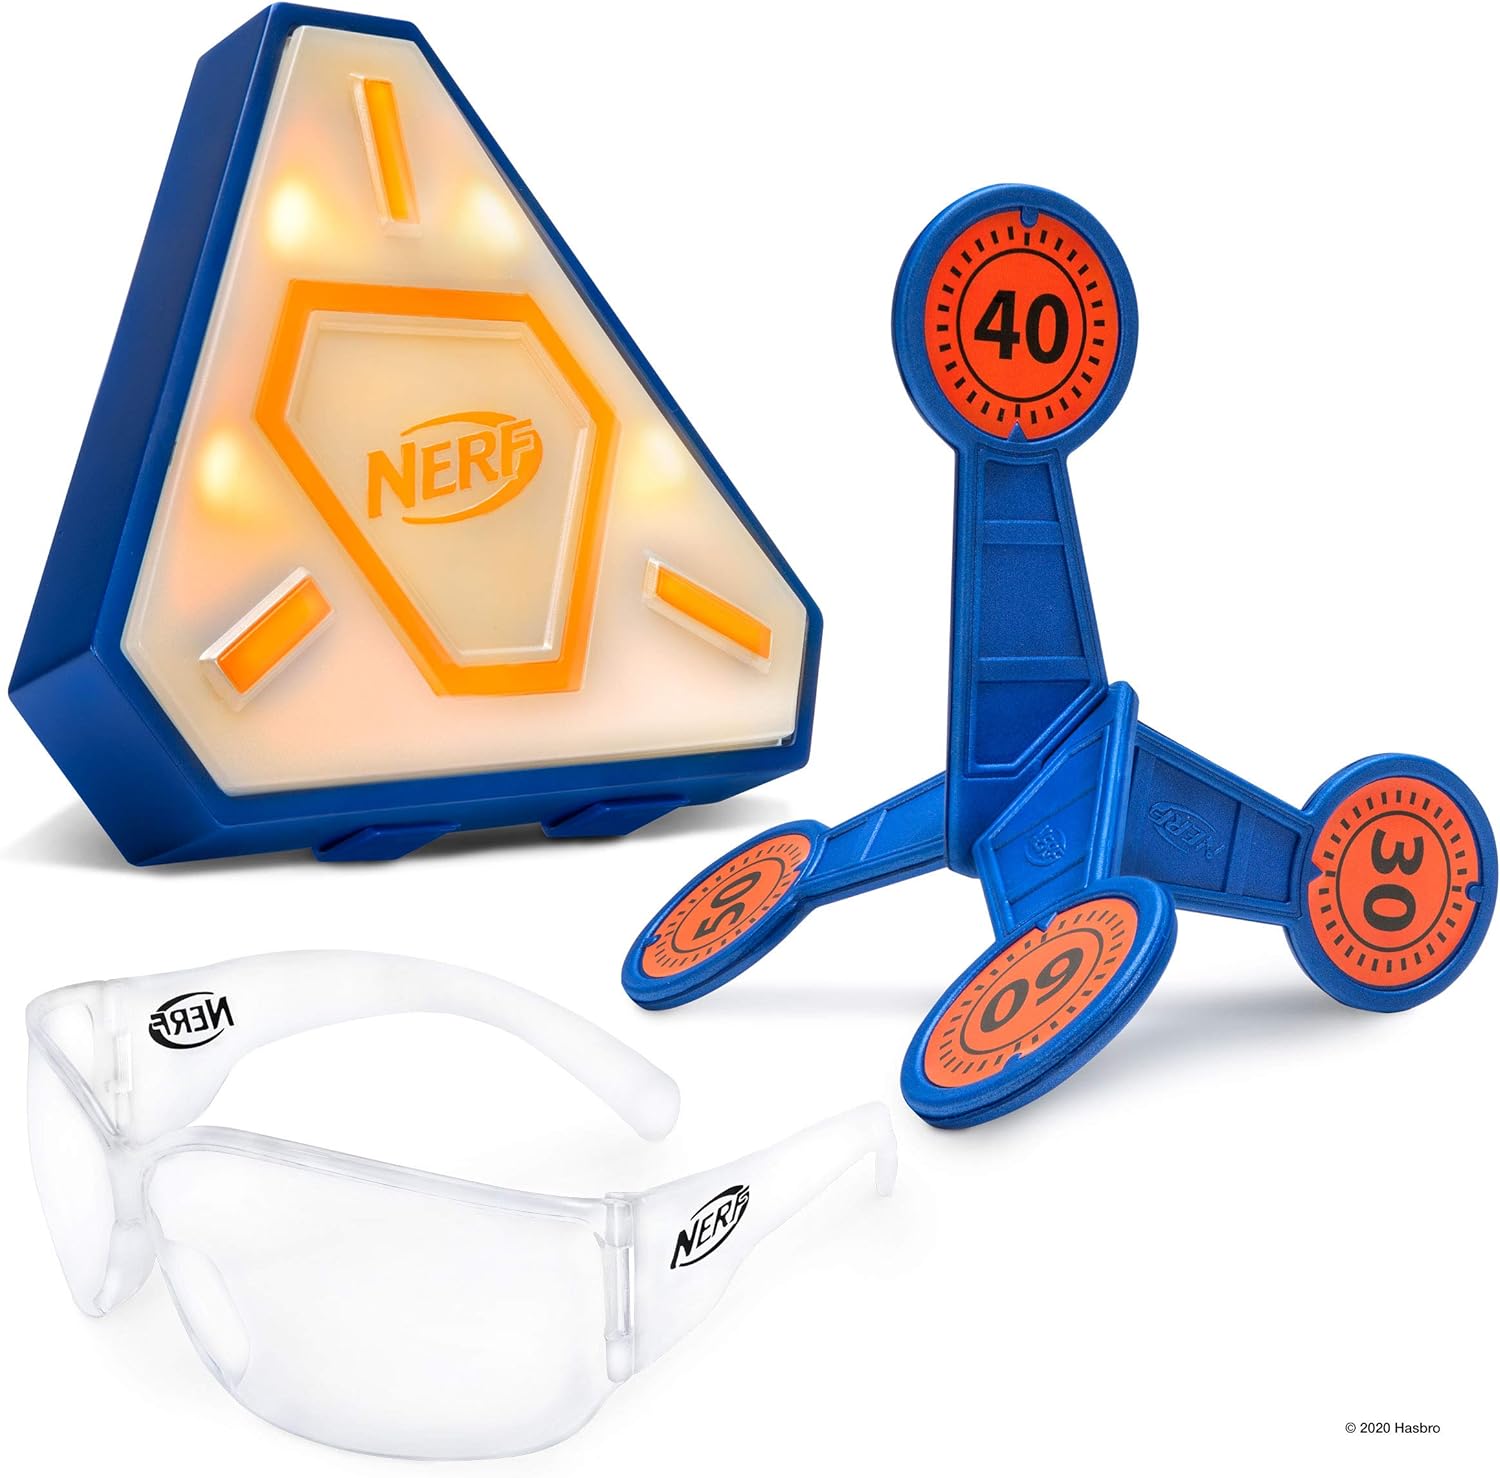 NERF Elite Strike Combo Pack - Includes 1 Flash Strike Target, 1 Flip Strike Target, and 1 Pair of Elite Glasses  Amazon Exclusive